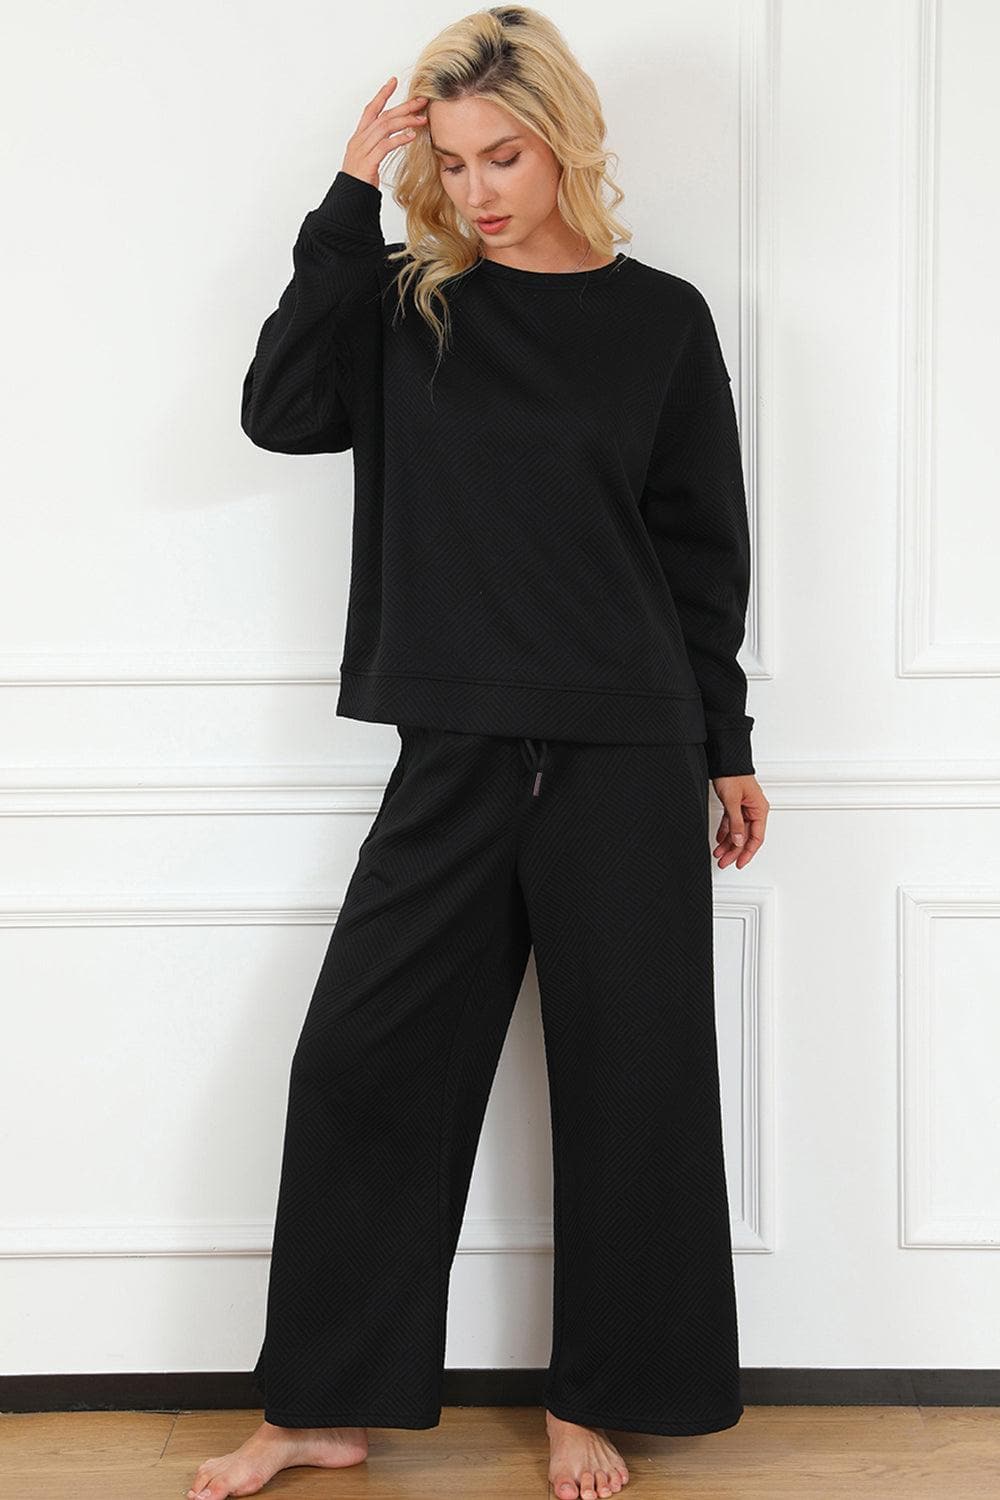 Double Take Full Size Textured Long Sleeve Top and Drawstring Pants Set - SwagglyLife Home & Fashion